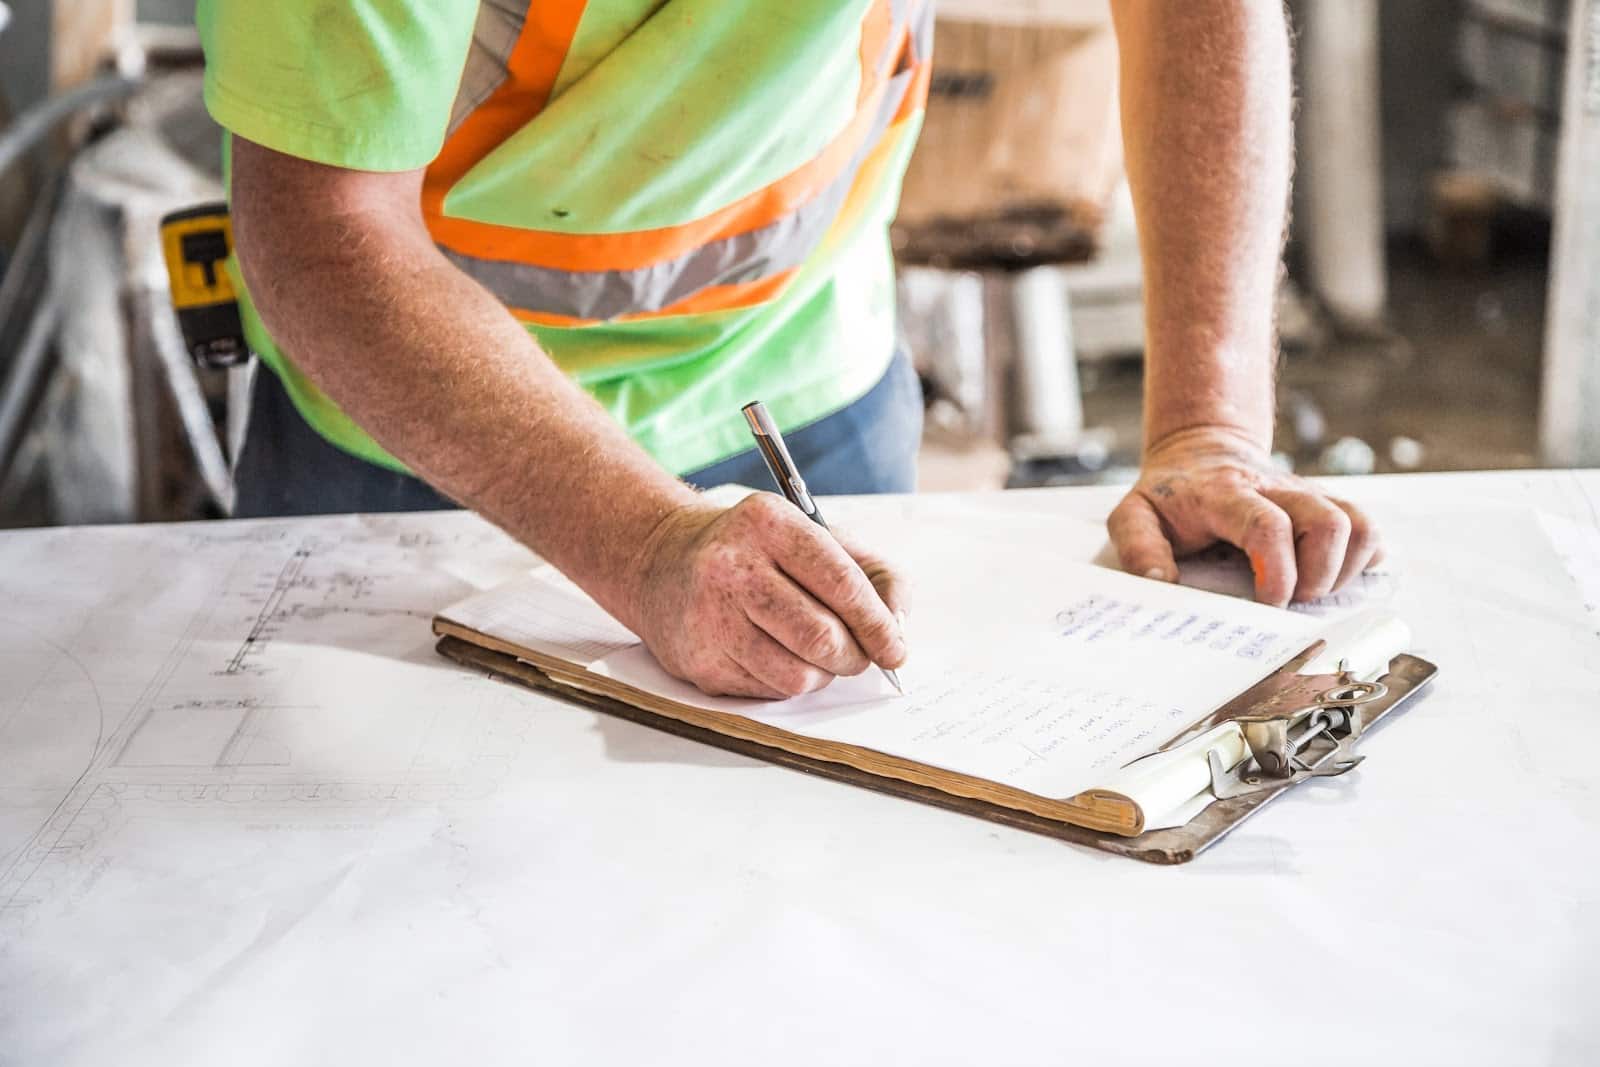 Considering a Career in Construction? Find Out About The Pros and Cons